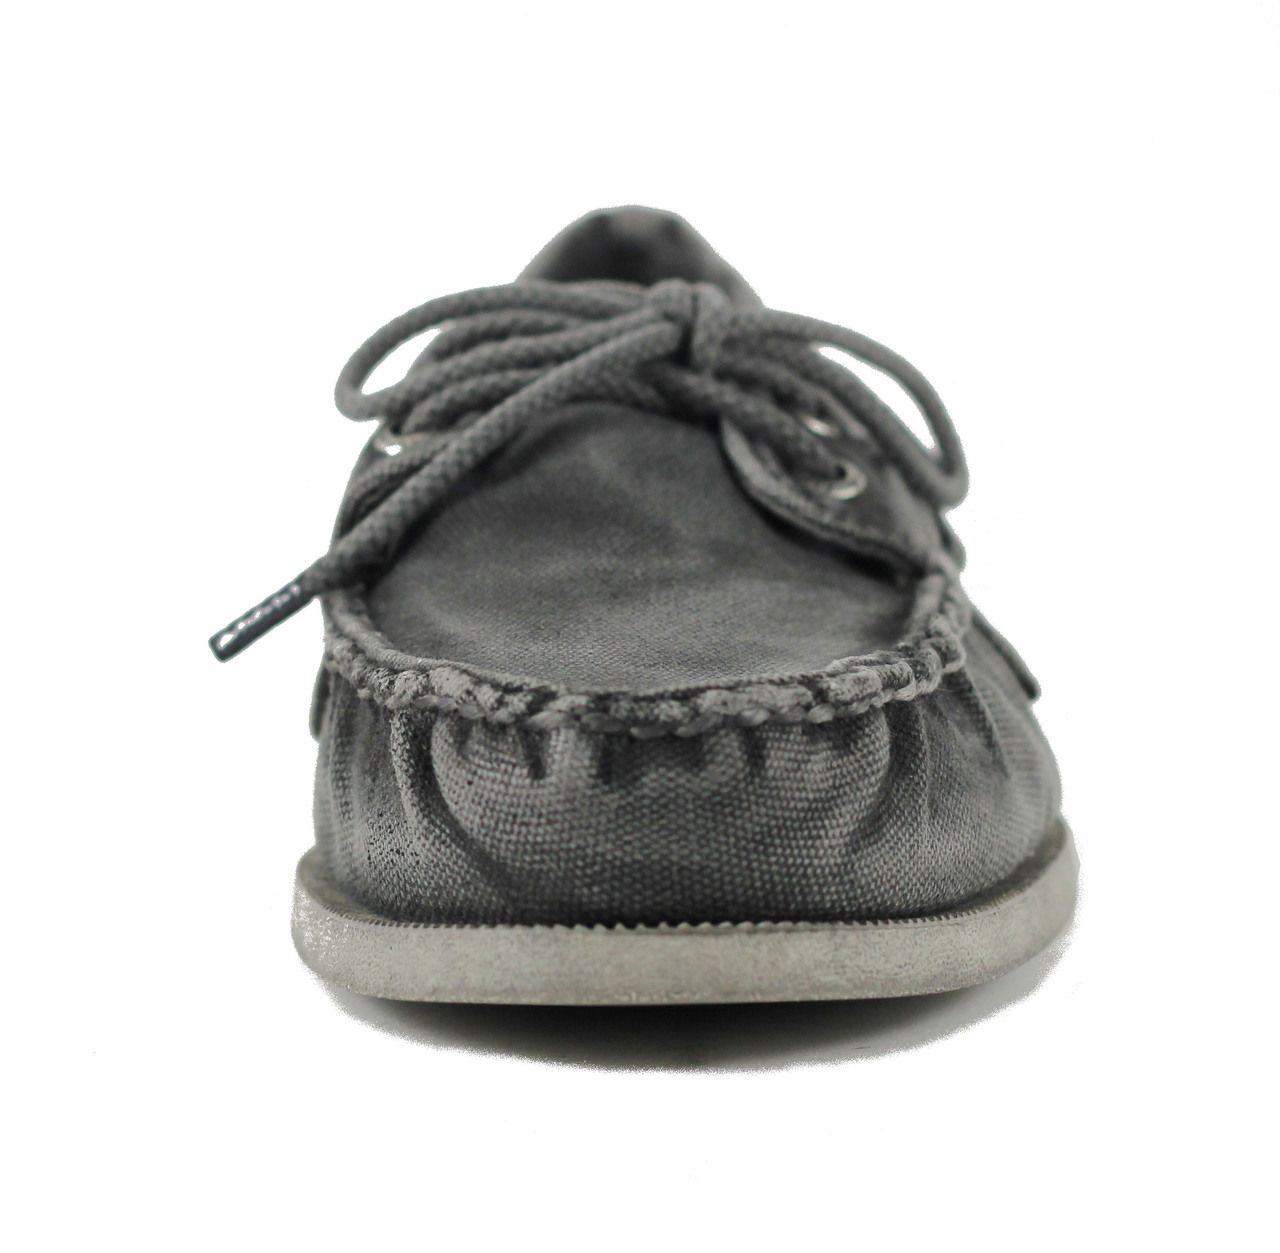 Sperry Top-Sider for Men: Authentic Original Washed Canvas 2-Eye Boat